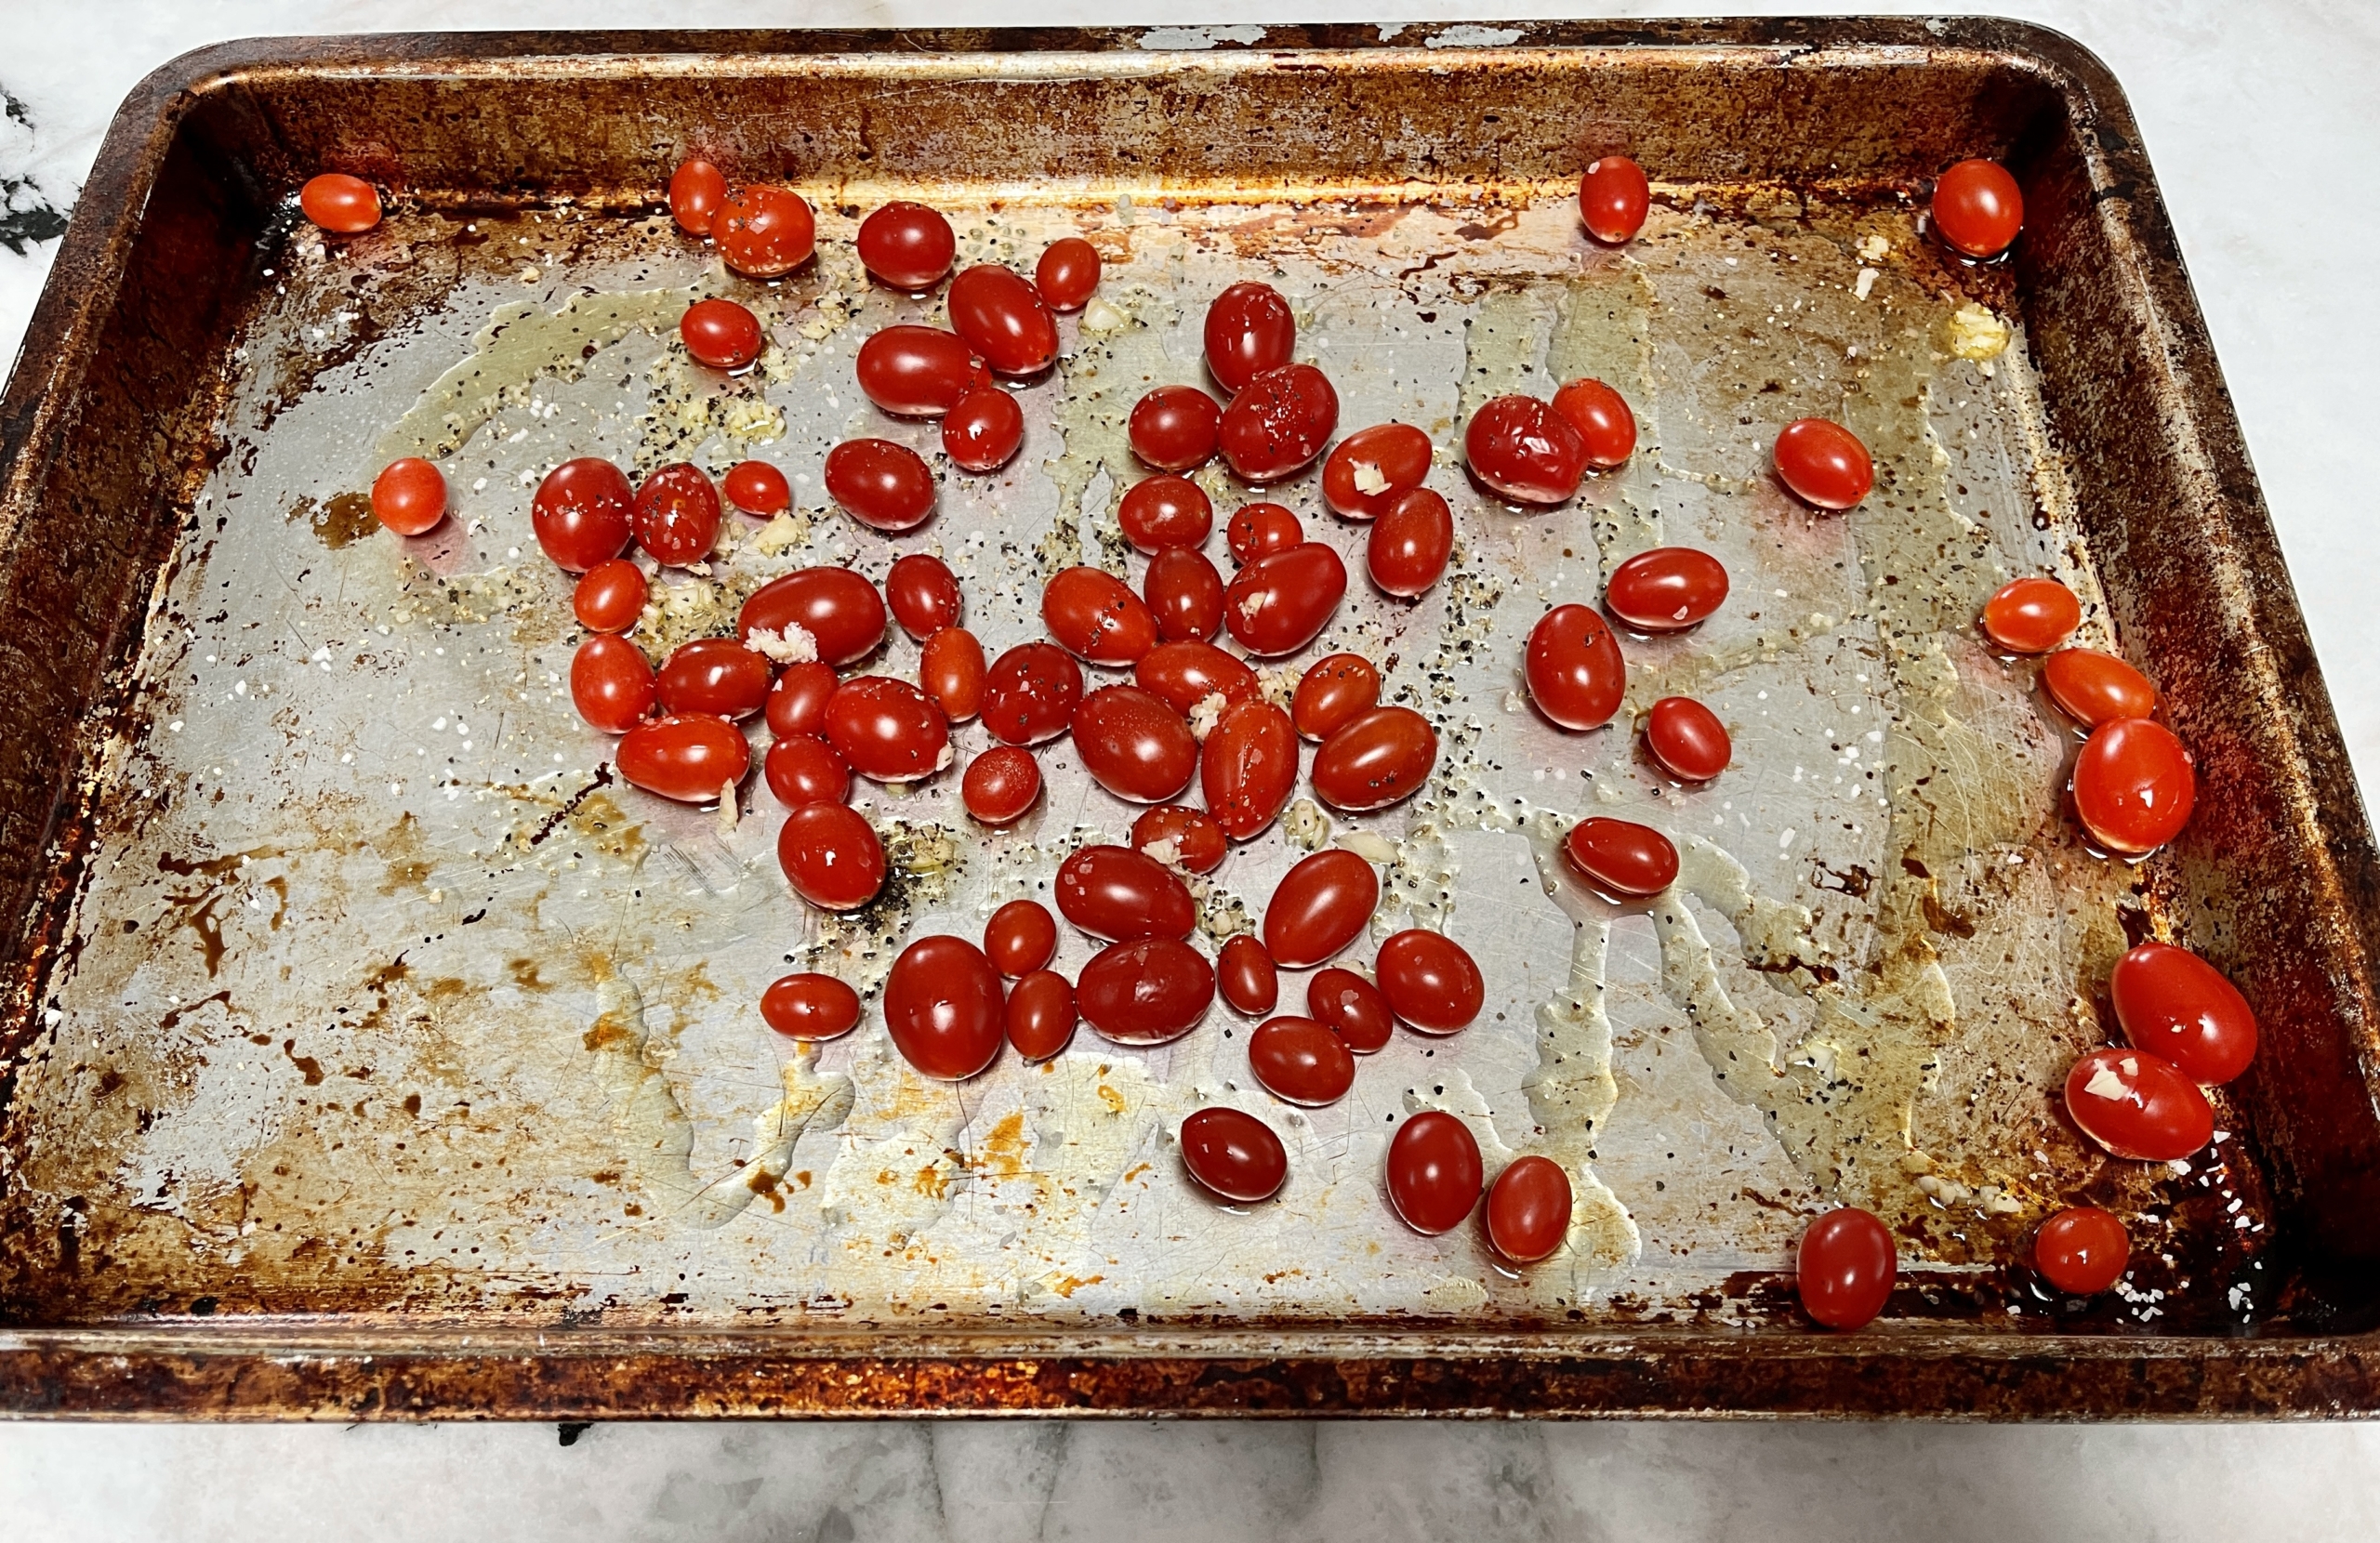 Place cherry or grape tomatoes on a sheet pan and drizzle with olive oil, salt, pepper, and garlic.